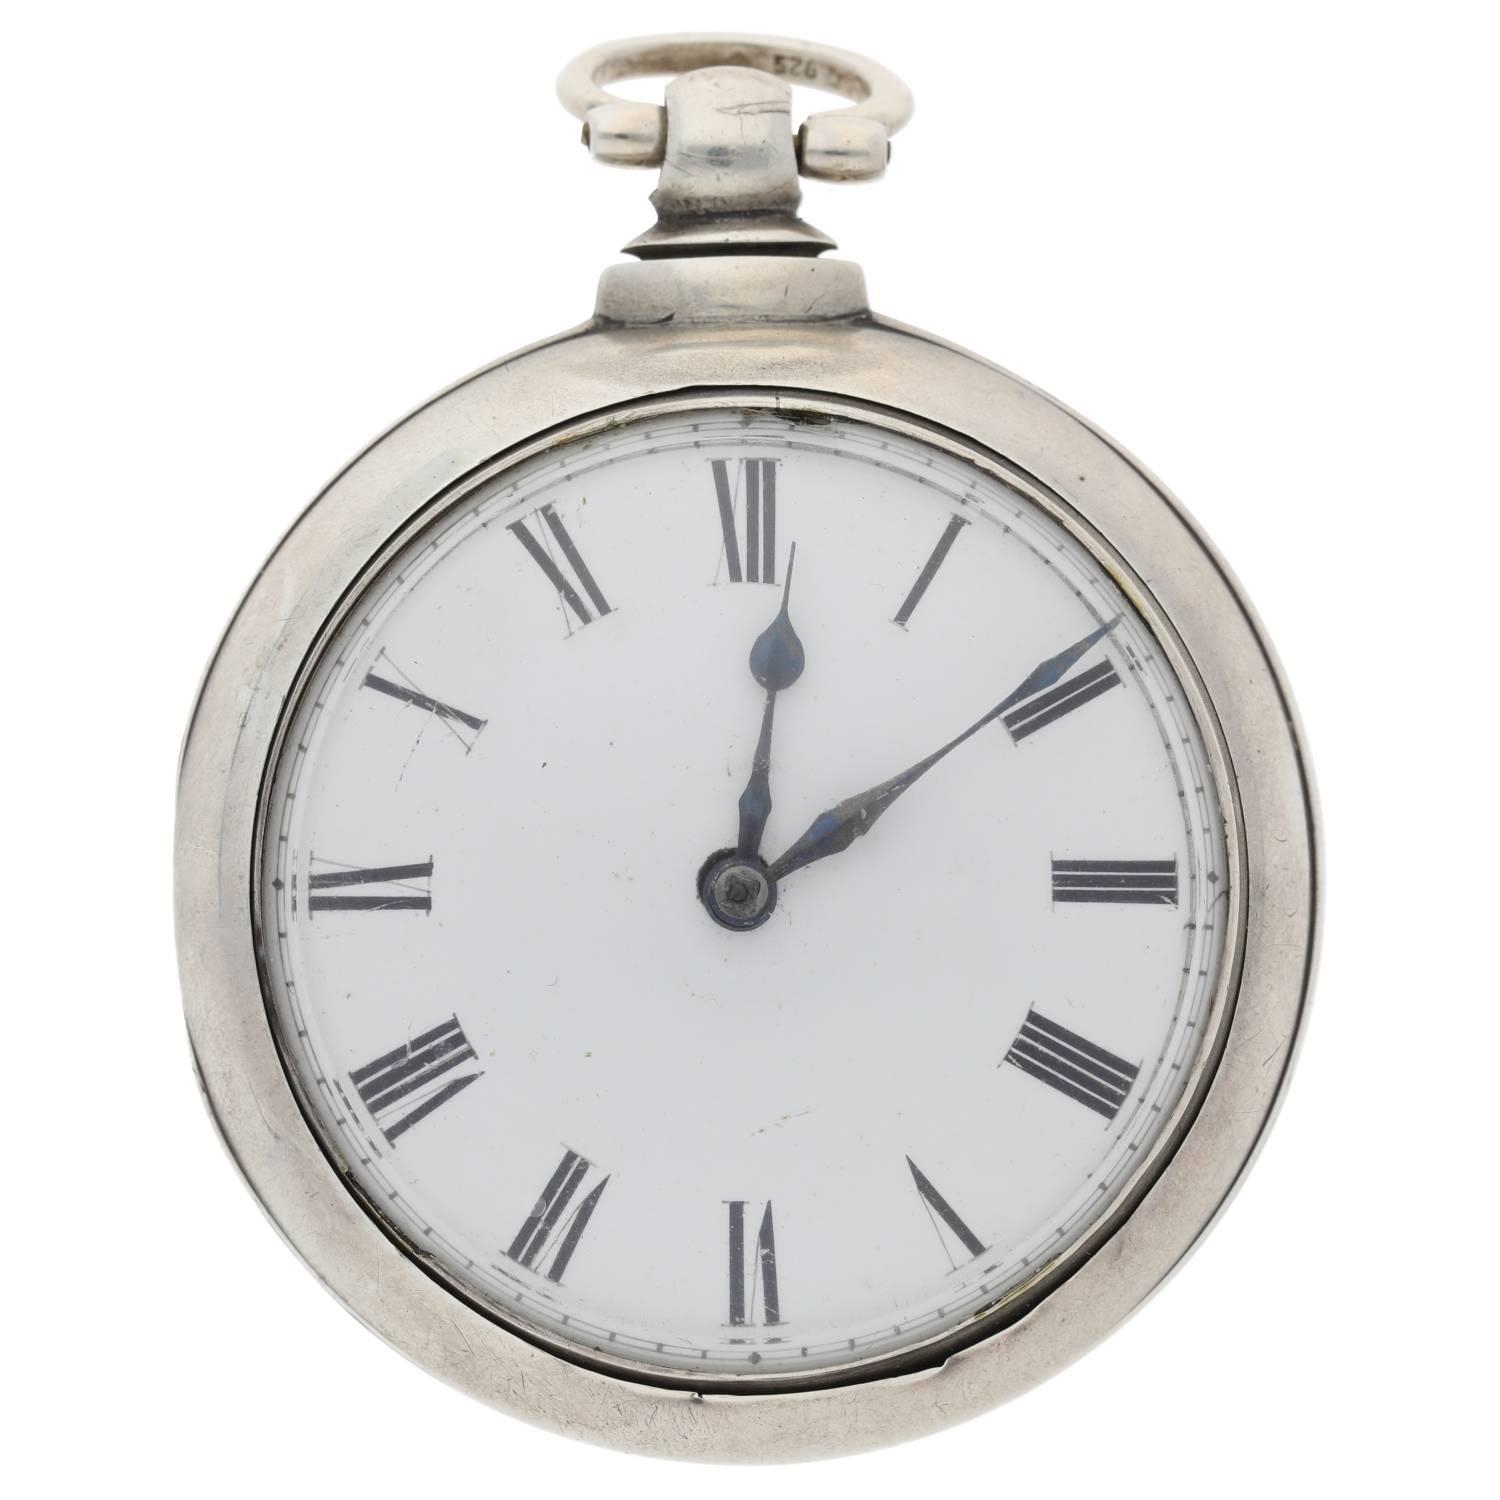 Early Victorian silver pair cased verge pocket watch, London 1840, unsigned fusee movement, no. - Image 2 of 7